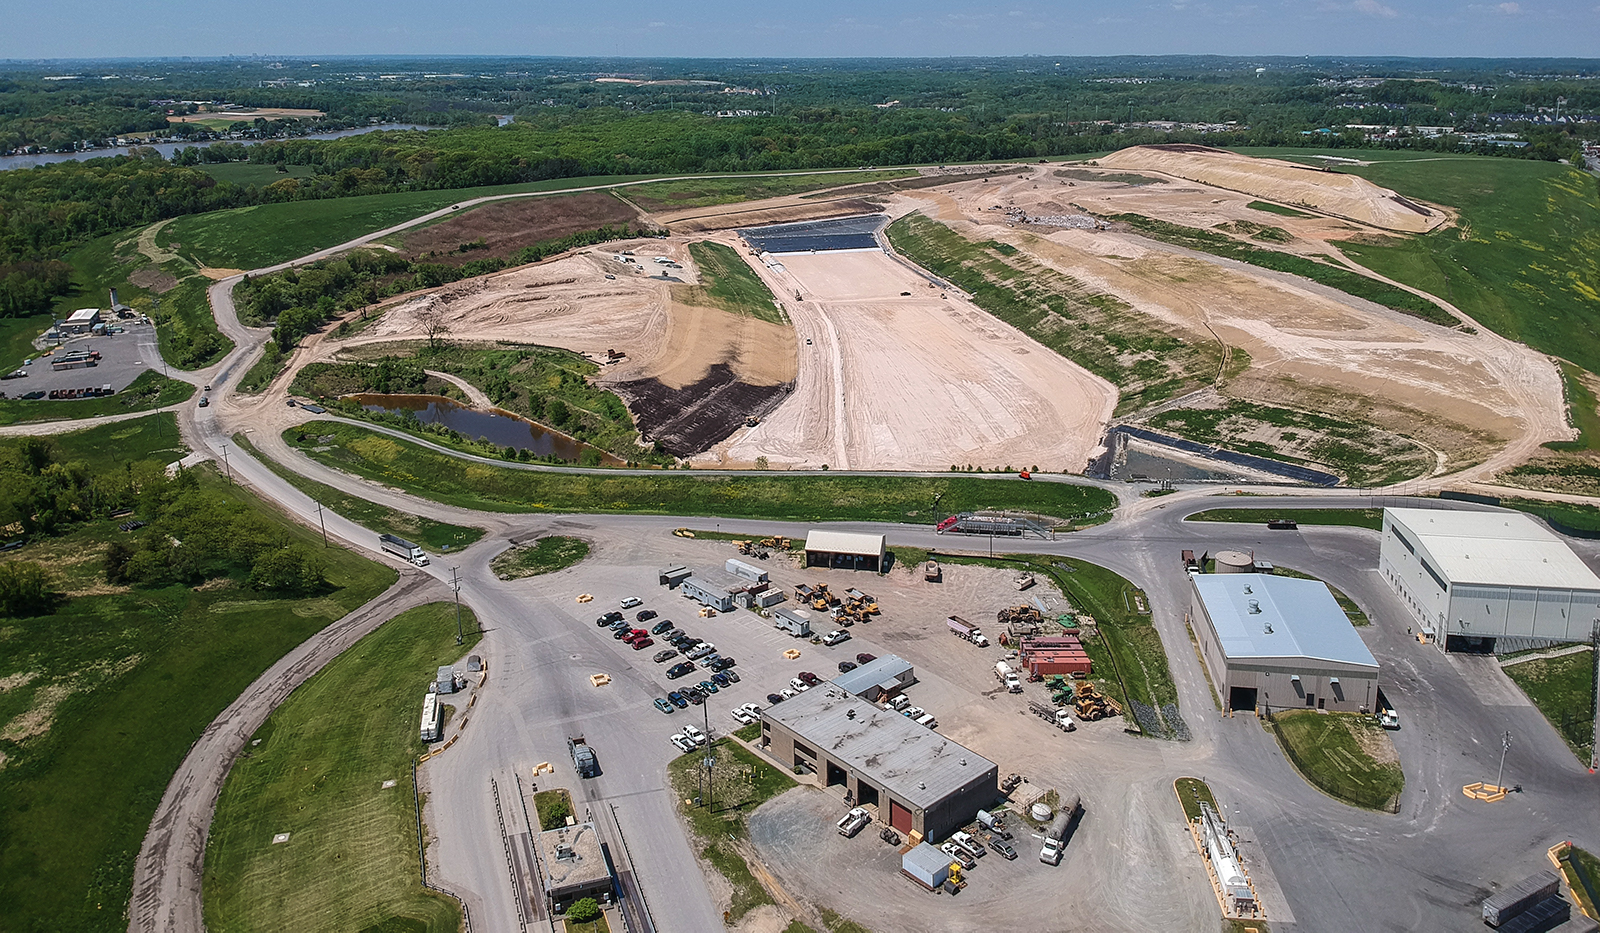 Aerial view of Millersville solid waste landfill